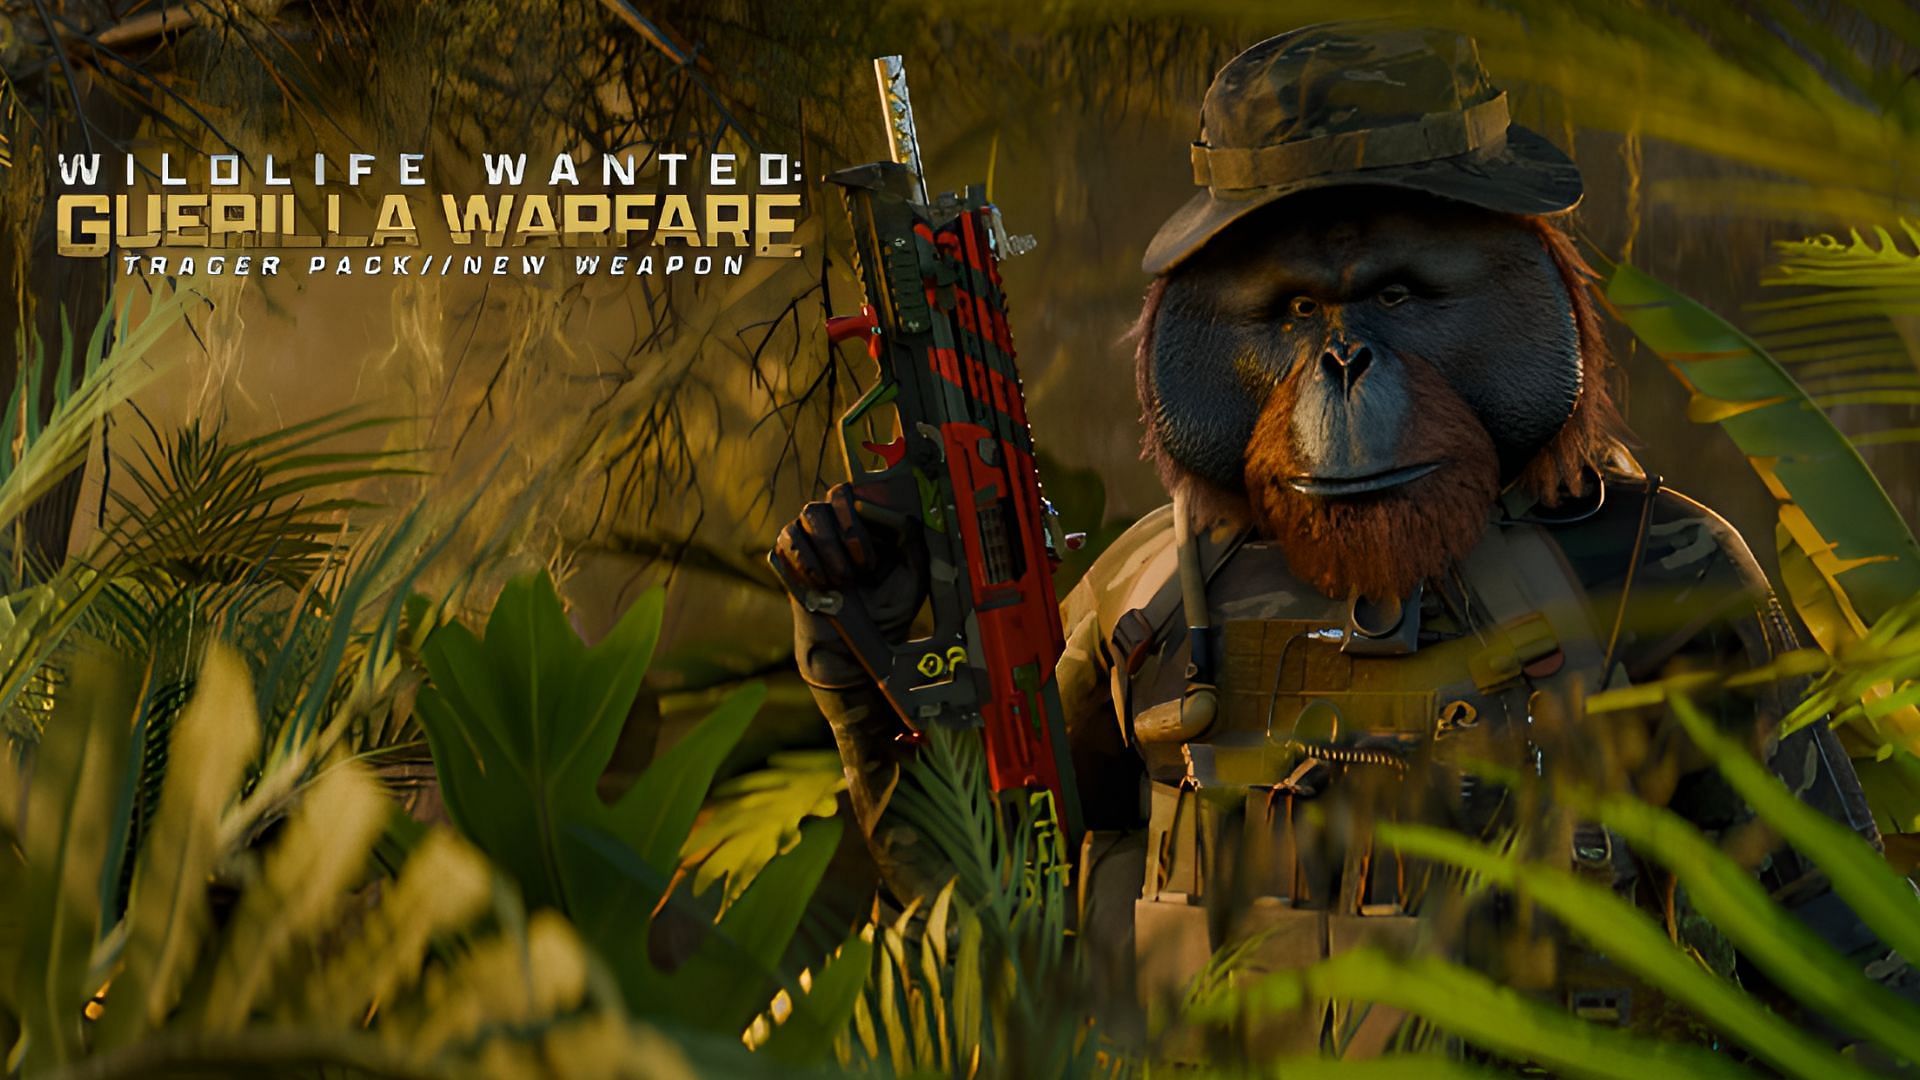 The Guerilla Warfare Tracer Pack features wilderness themed skins in MW3 and Warzone , Wildlife Wanted Guerilla Warfare Tracer Pack in MW3 and Warzone